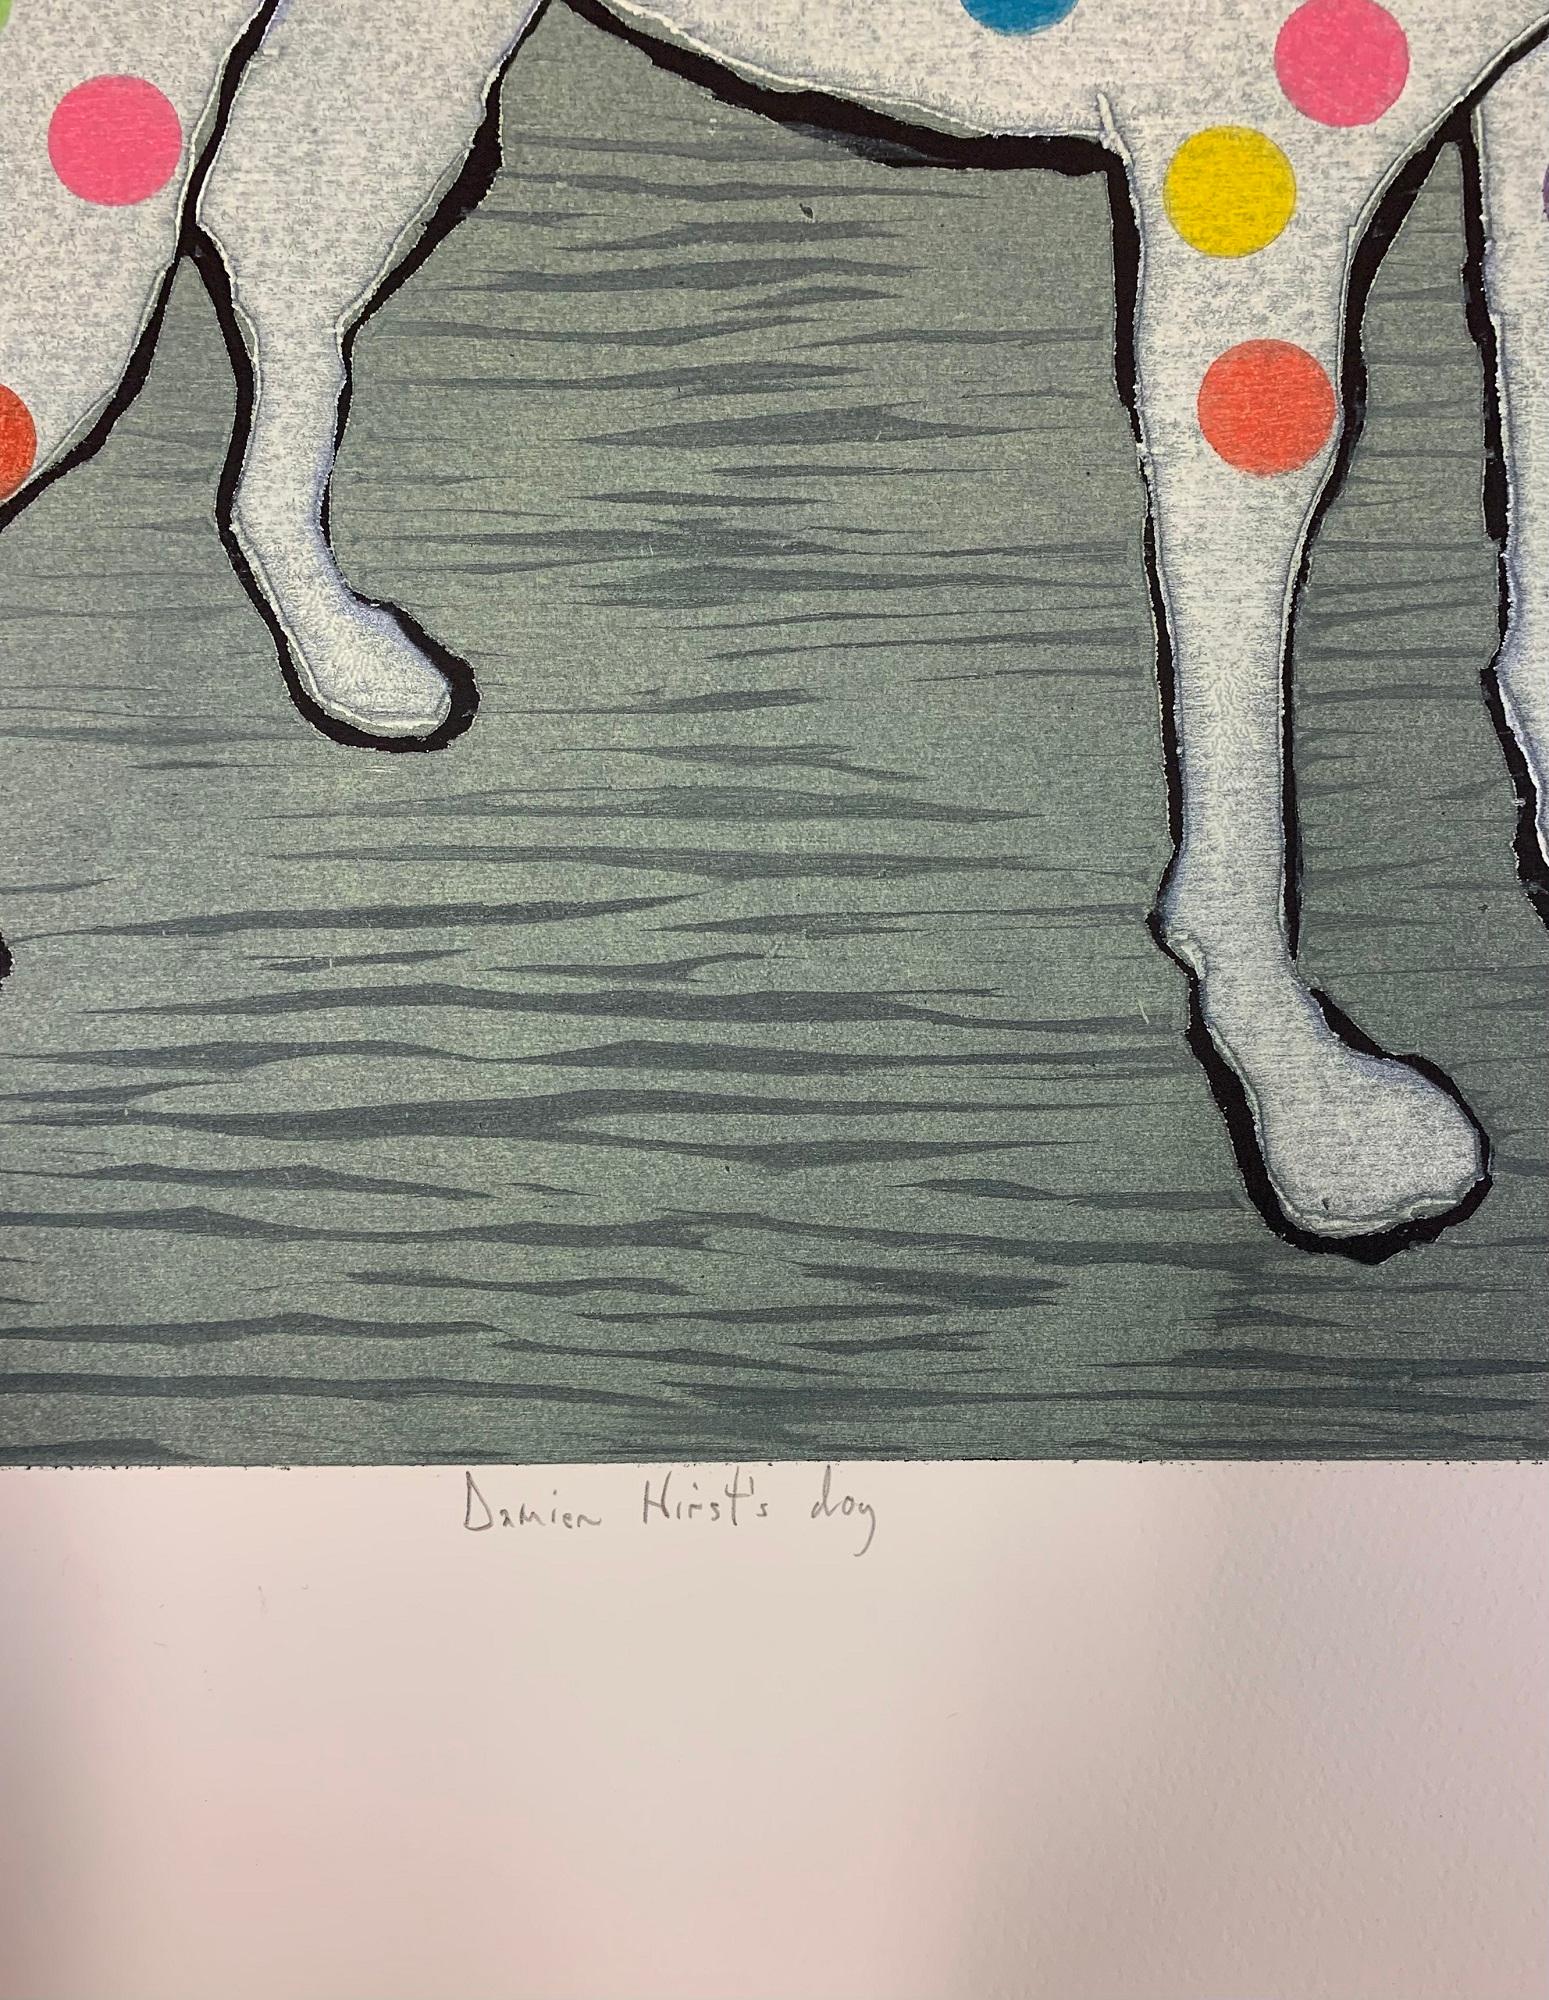 Damien Hirst’s Dog by Mychael Barratt
Limited edition art print
Handmade Woodcut on paper
Edition of 100
Signed and Titled
Complete size of sheet: 63 H x 67 W x 0.1 D cm (24.80 x 26.38 x 0.04 in)
Please note sheet sizes may vary
SOLD UNFRAMED

Image